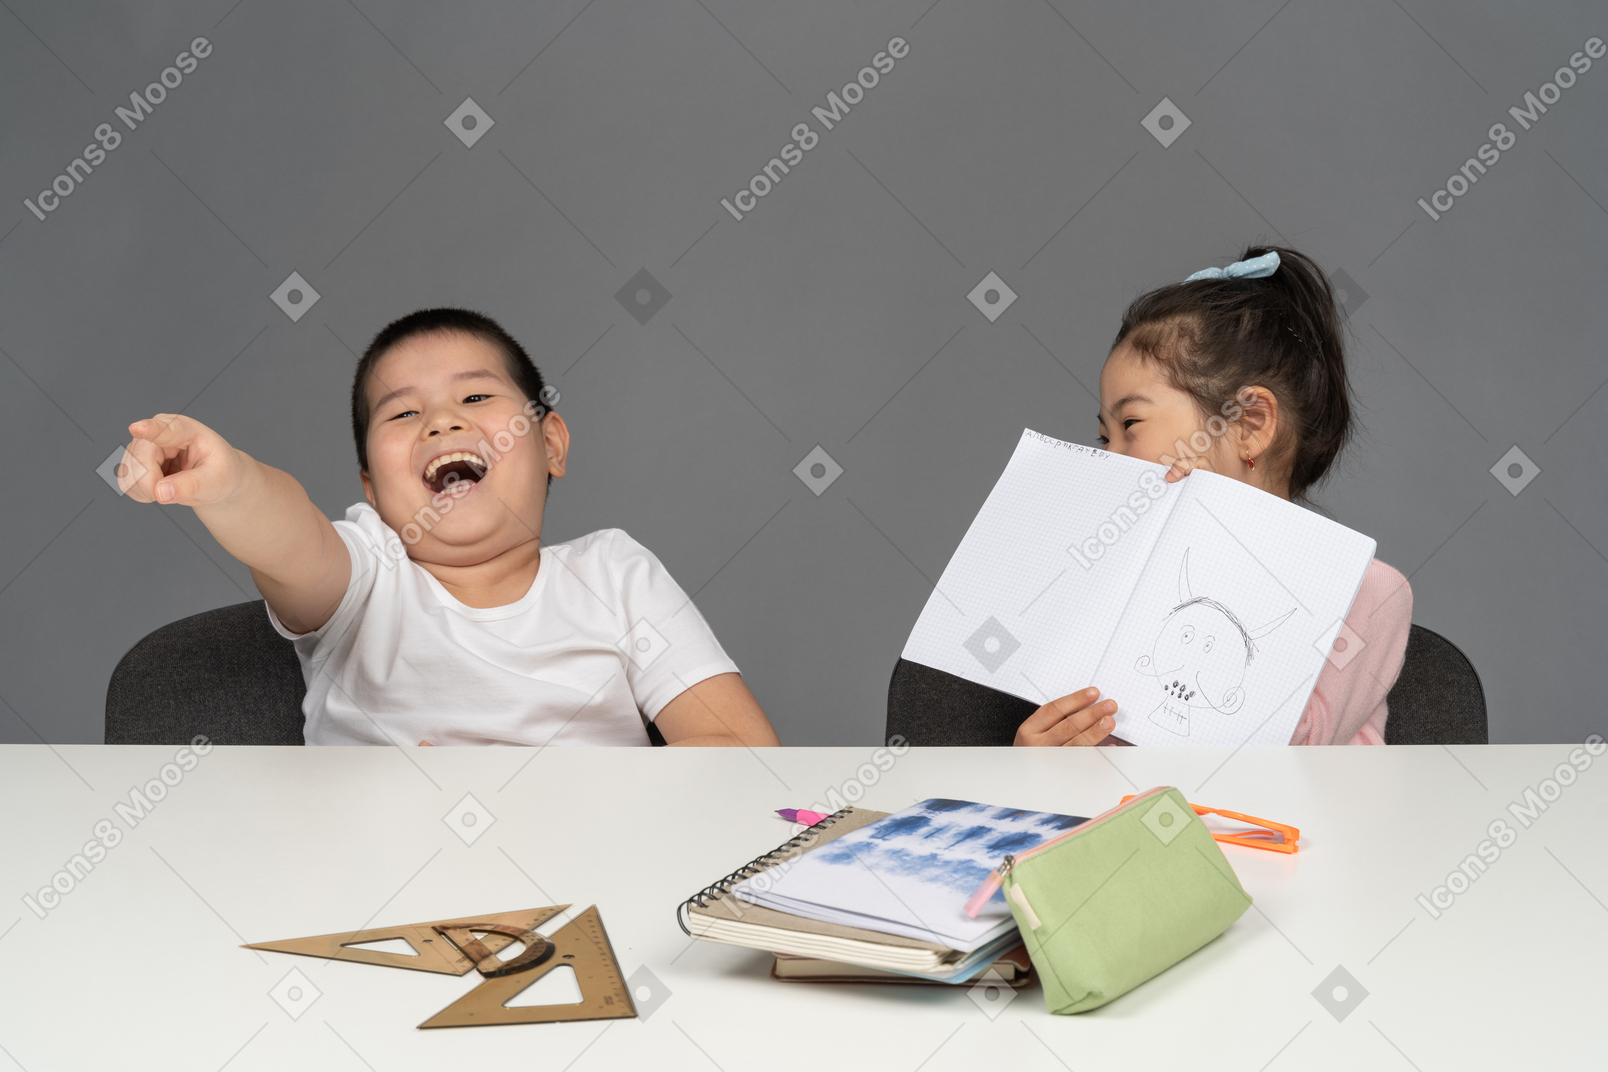 Boy laughing and pointing his finger next to his sister